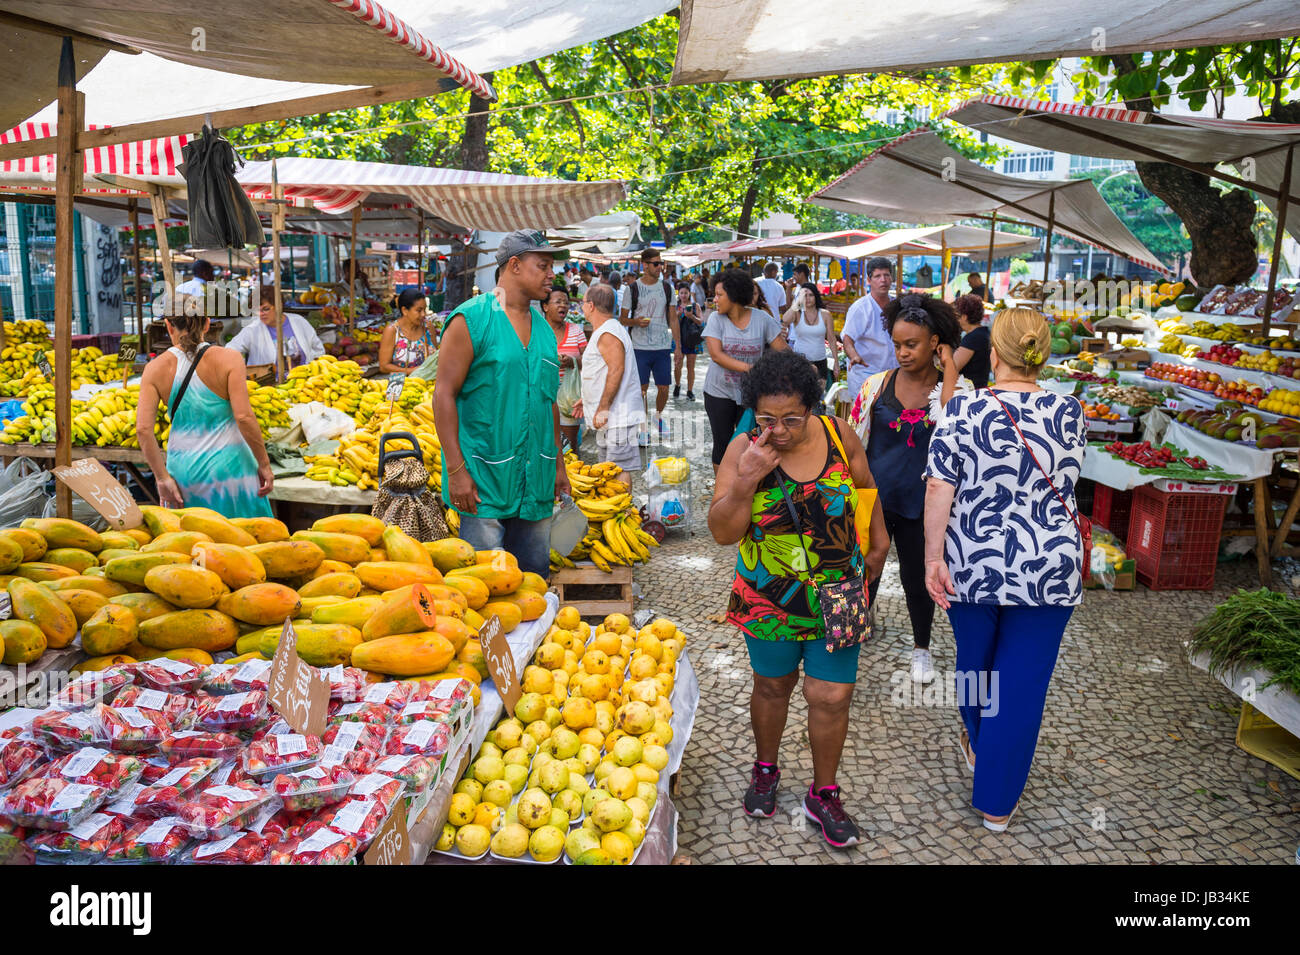 RIO DE JANEIRO - JANUARY 31, 2017: Tropical fruits and vegetables wait for customers browsing the weekly farmer's market in Ipanema Stock Photo